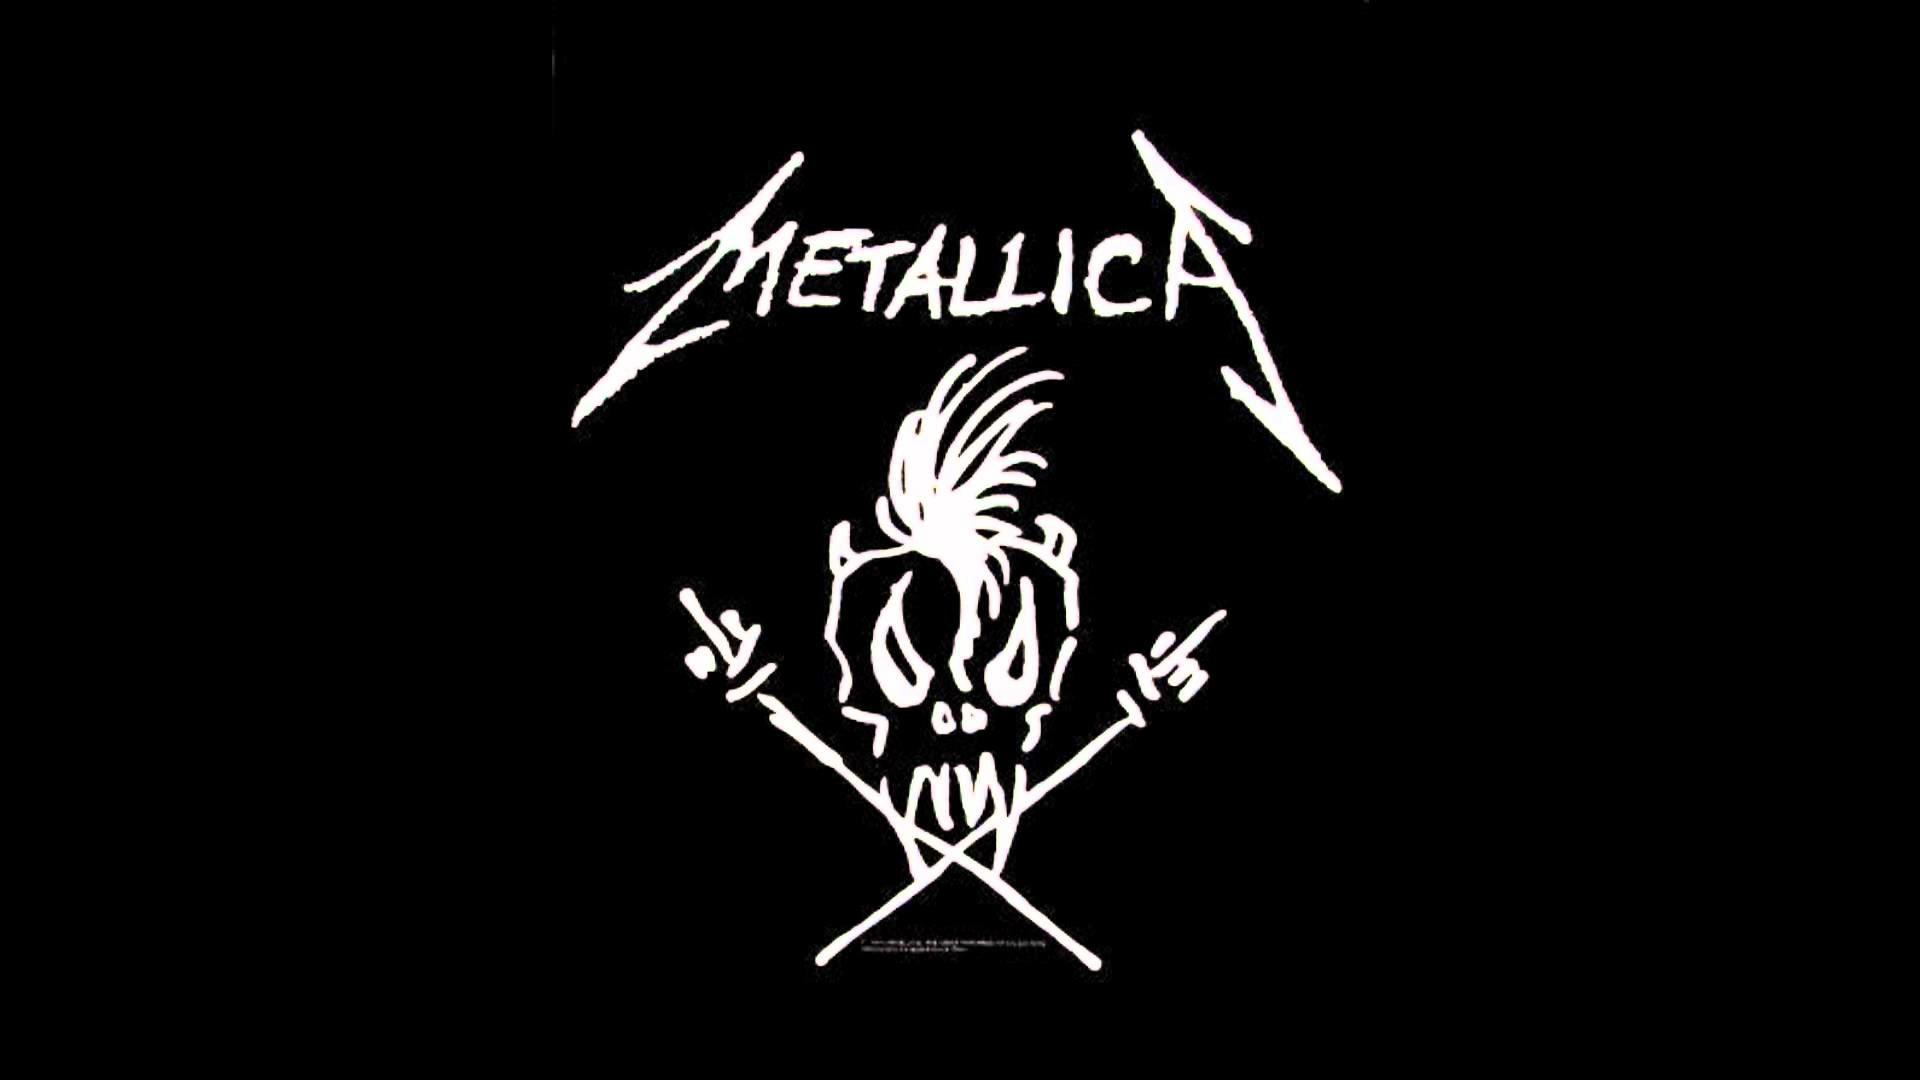 Metallica and Justice for All Wallpaper